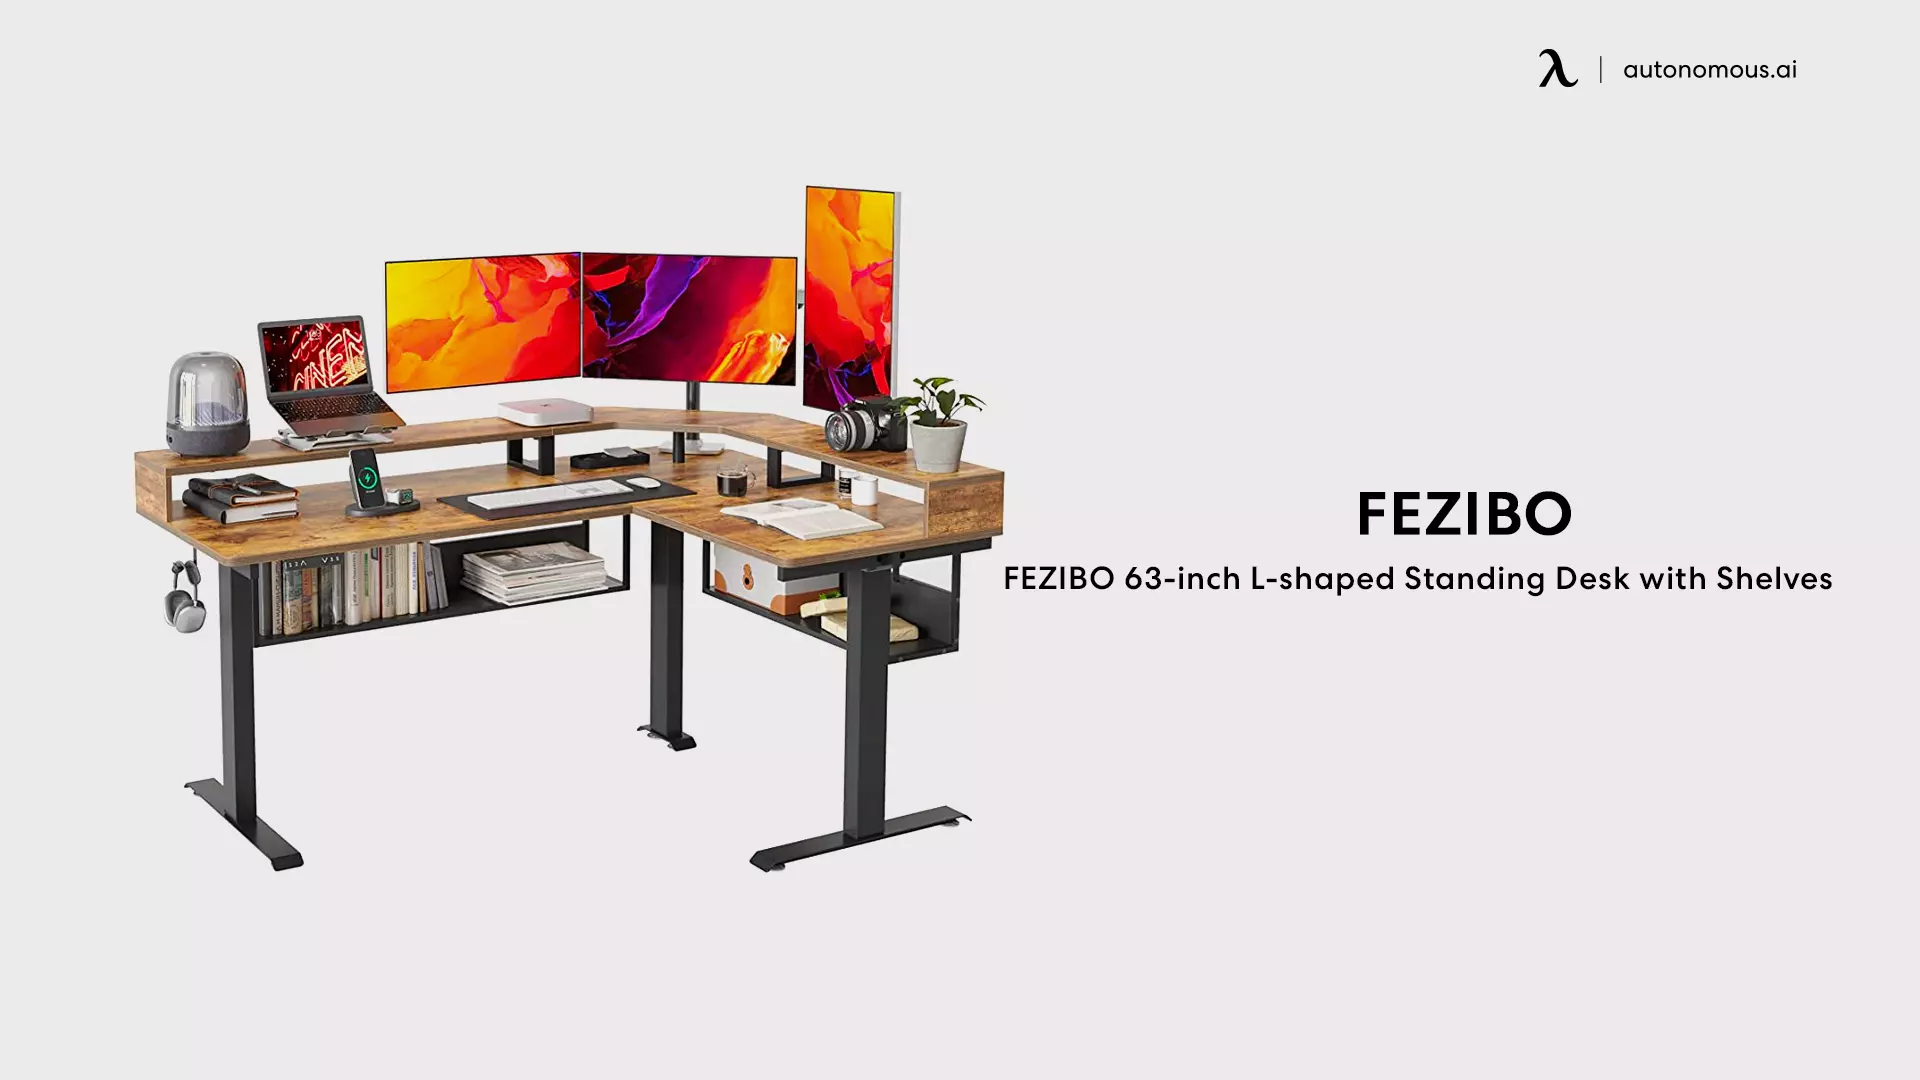 FEZIBO 63-inch L-shaped Standing Desk with Shelves